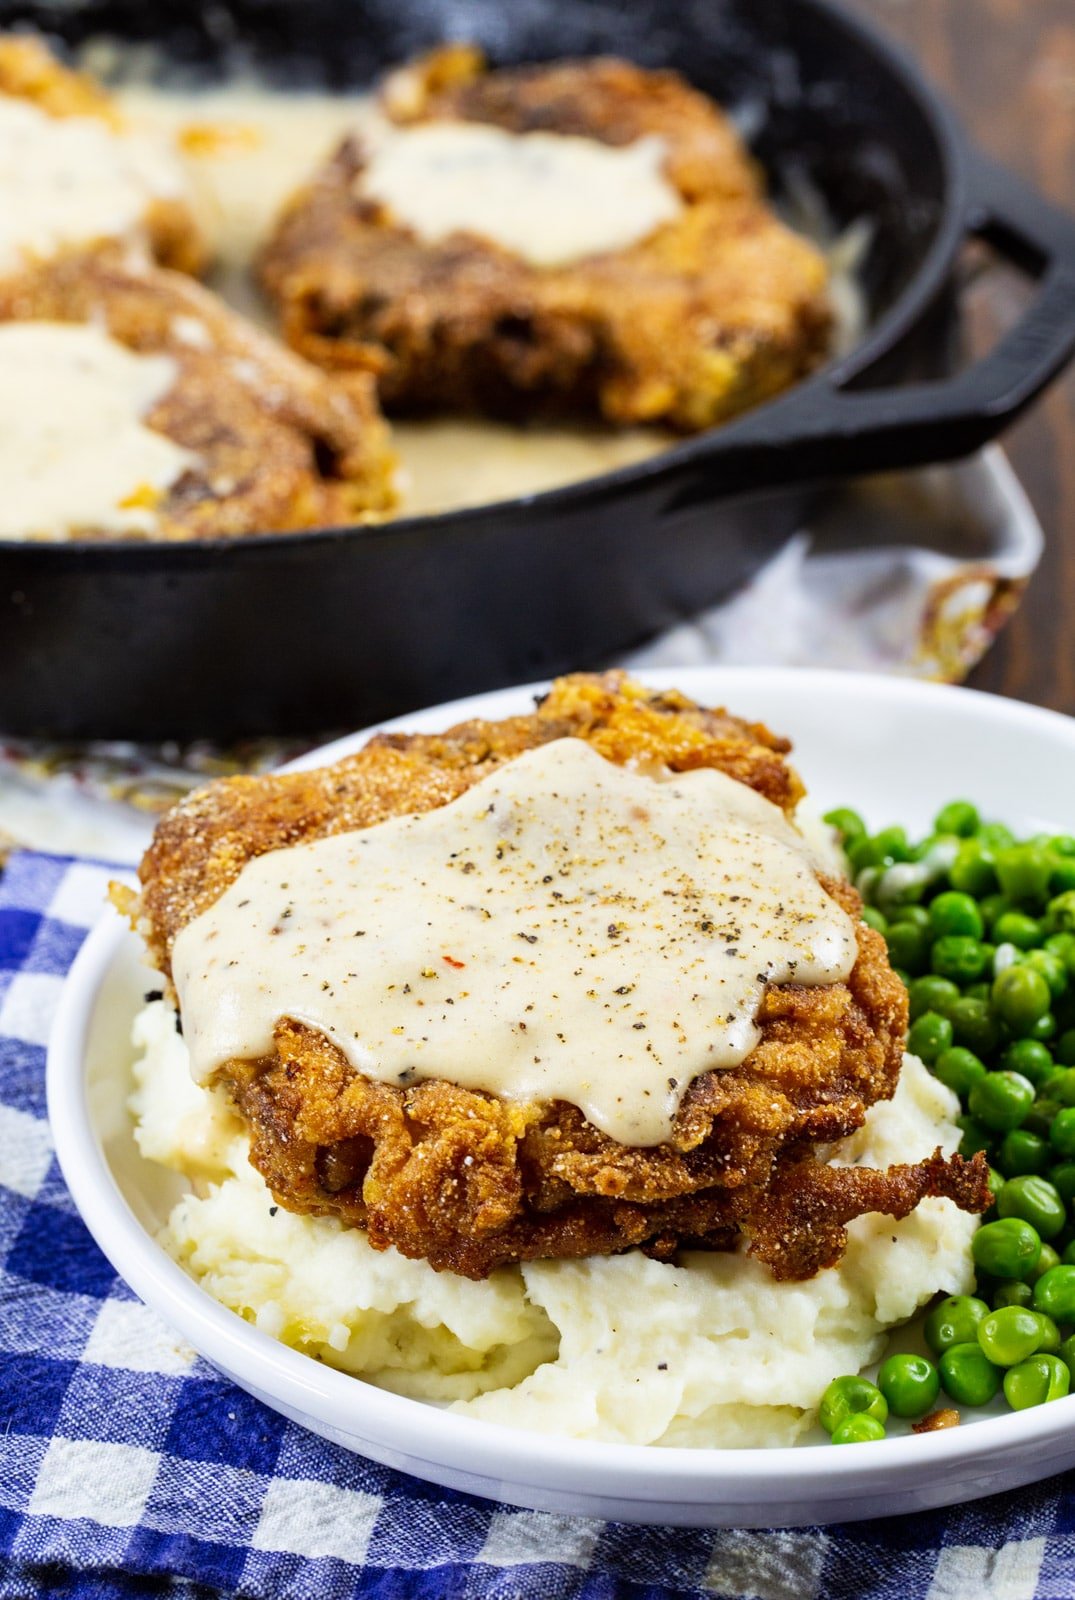 Southern Fried Pork Chop with White Gravy on a plate with mashed potatoes and peas.